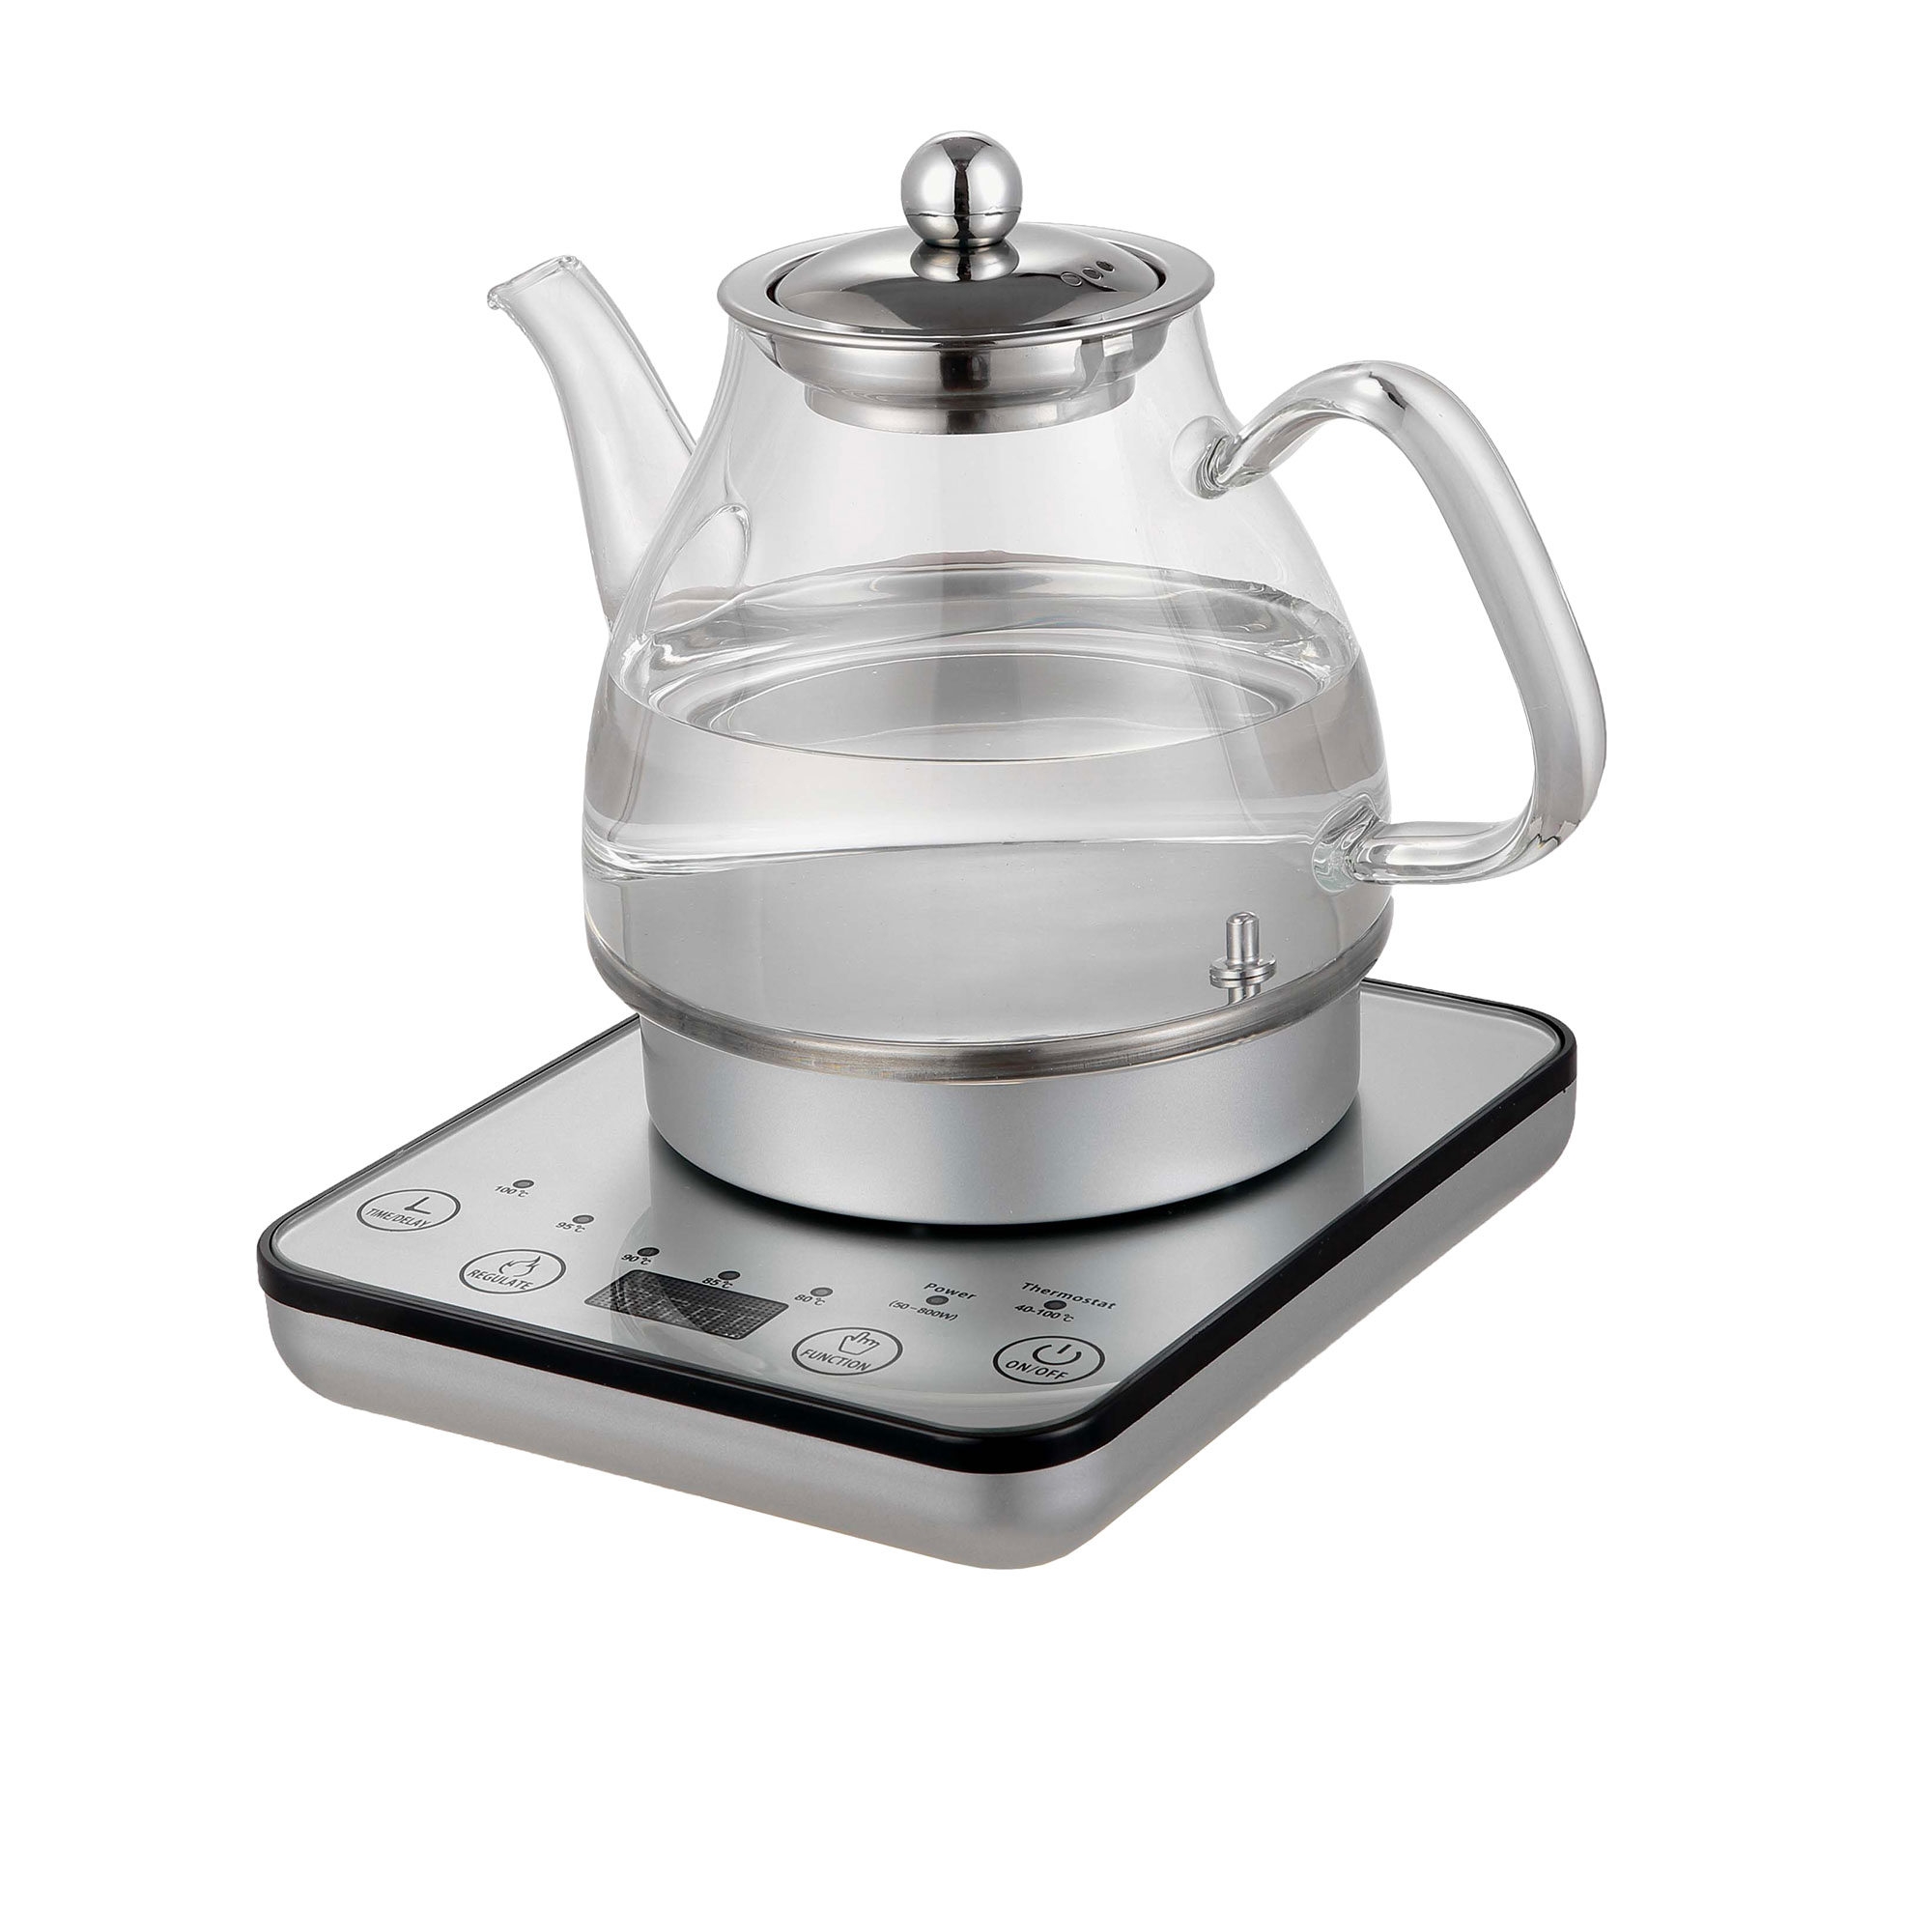 Healthy Choice Digital Glass Kettle with Tea Infuser 1.2L Image 1